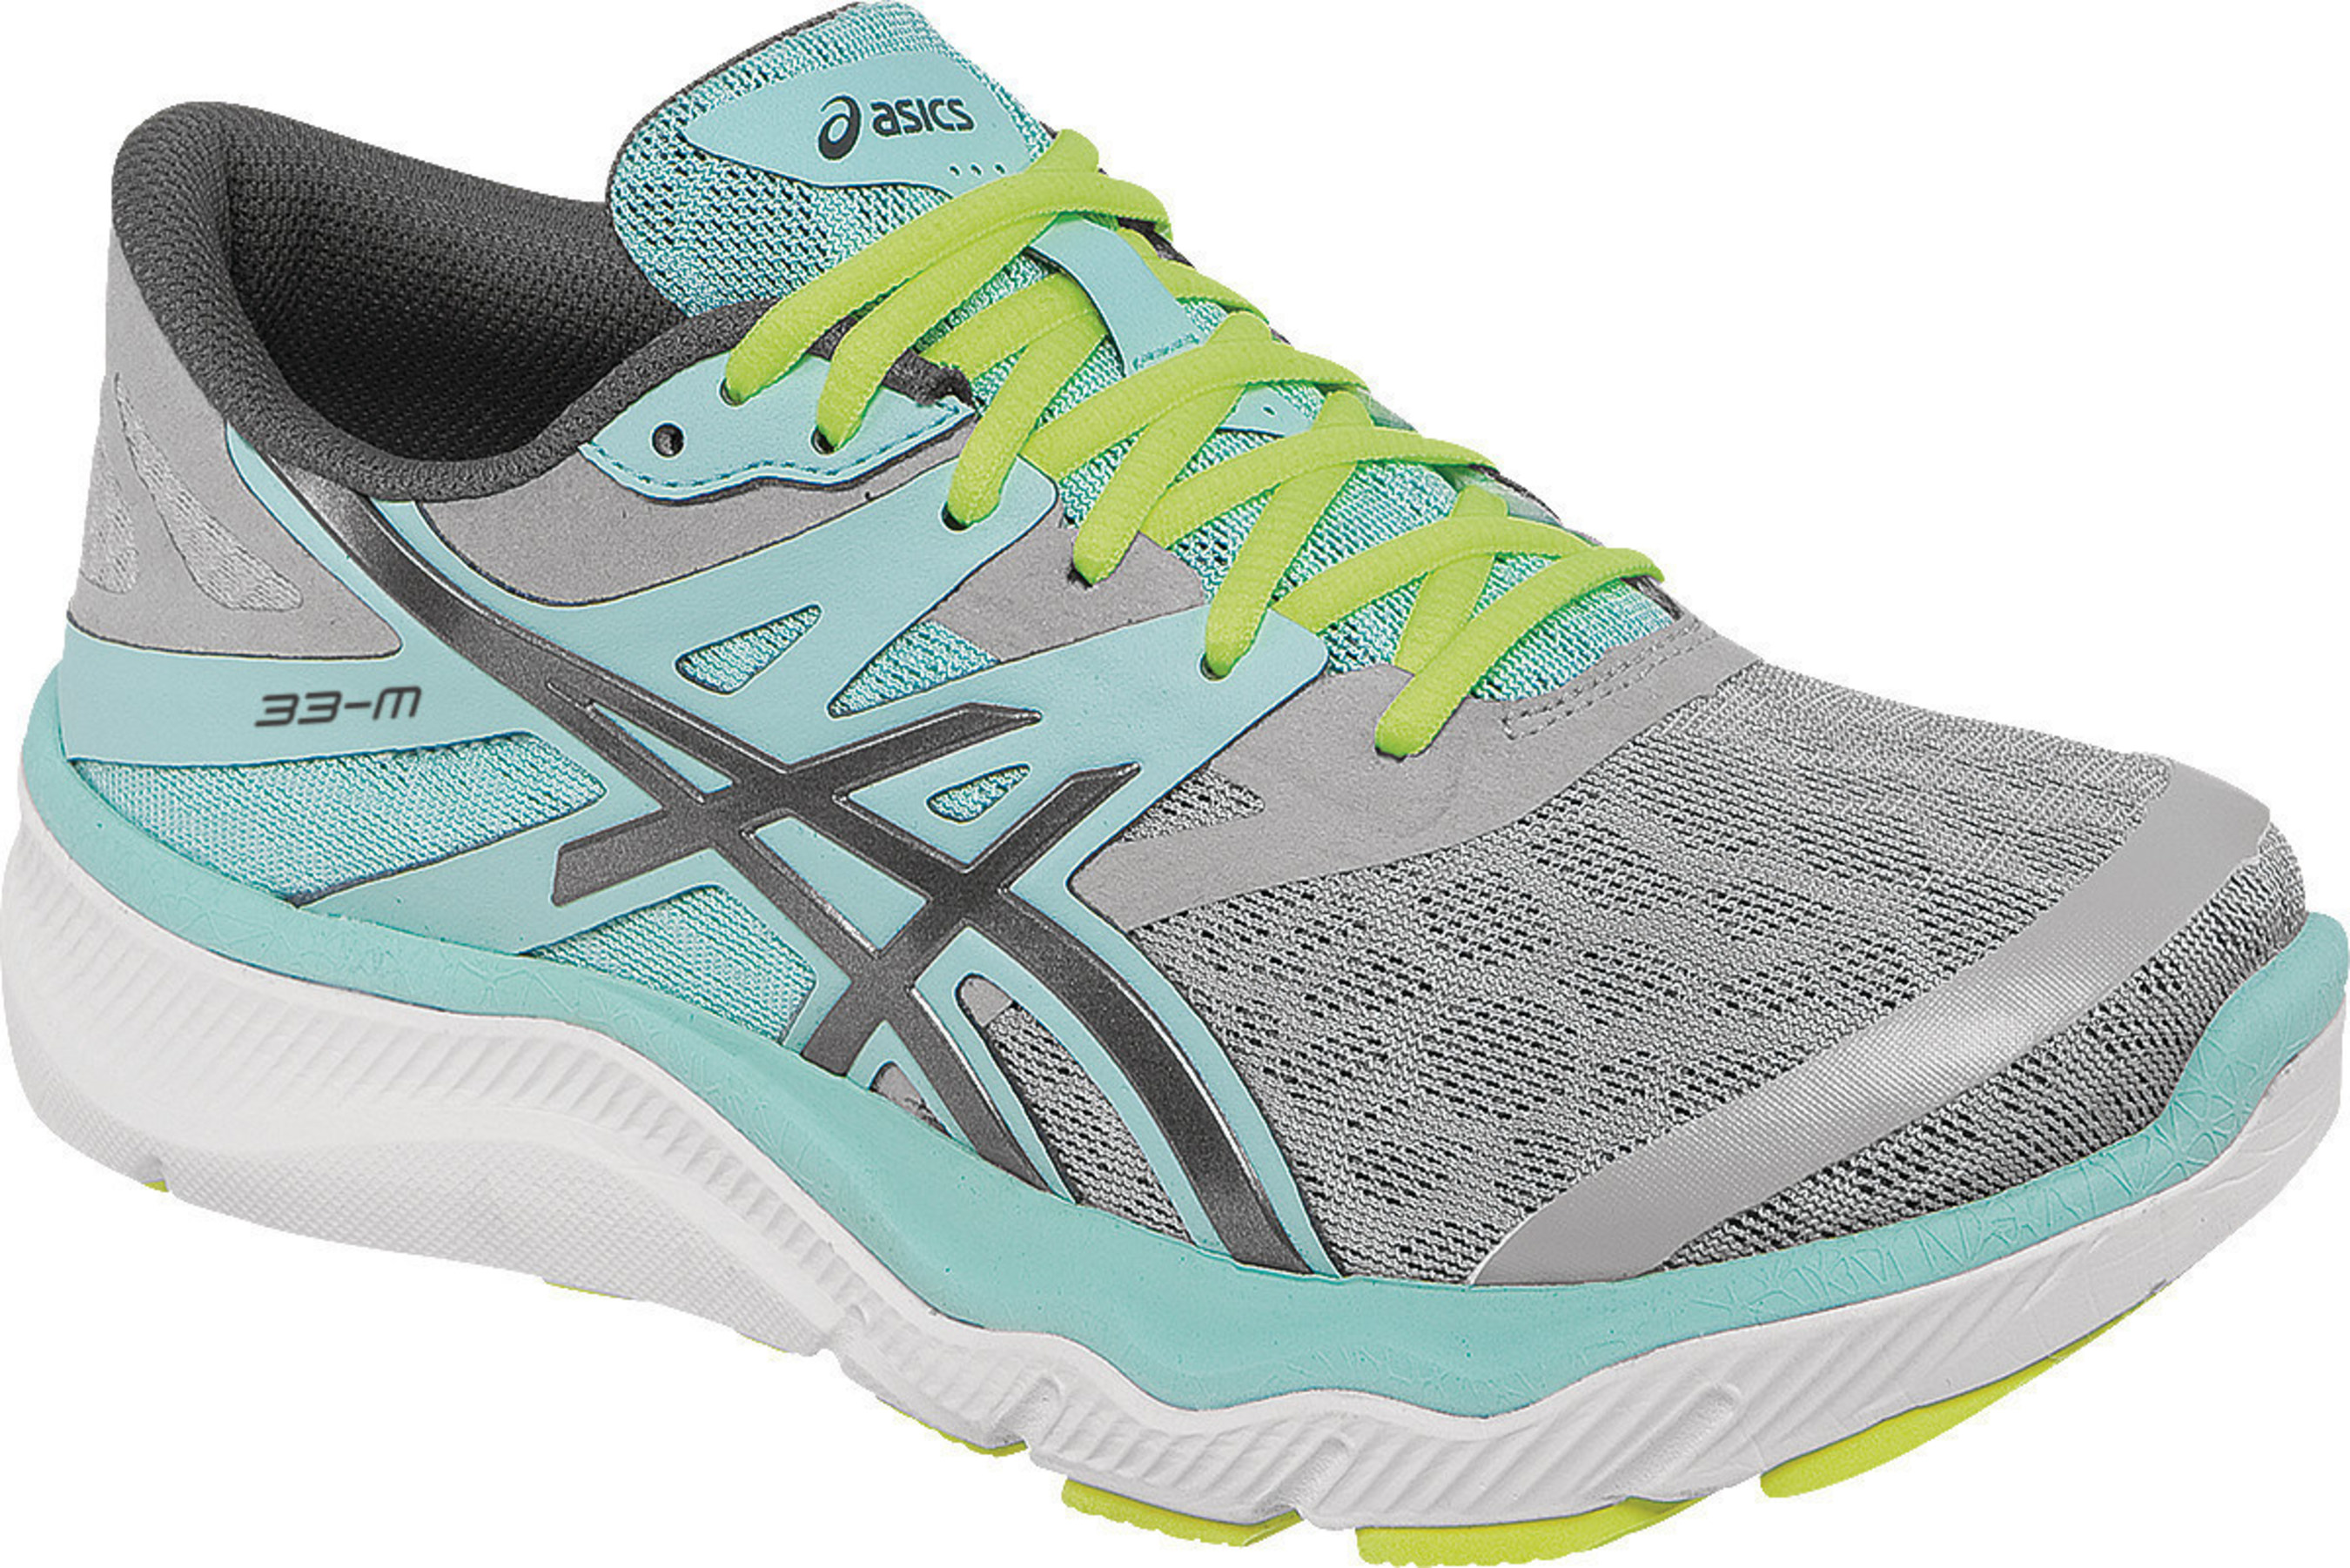 ASICS 33-M™ And GEL-Noosa Tri™ 10 Race Past The Competition, Named Sneakers Award Winners" From Magazine